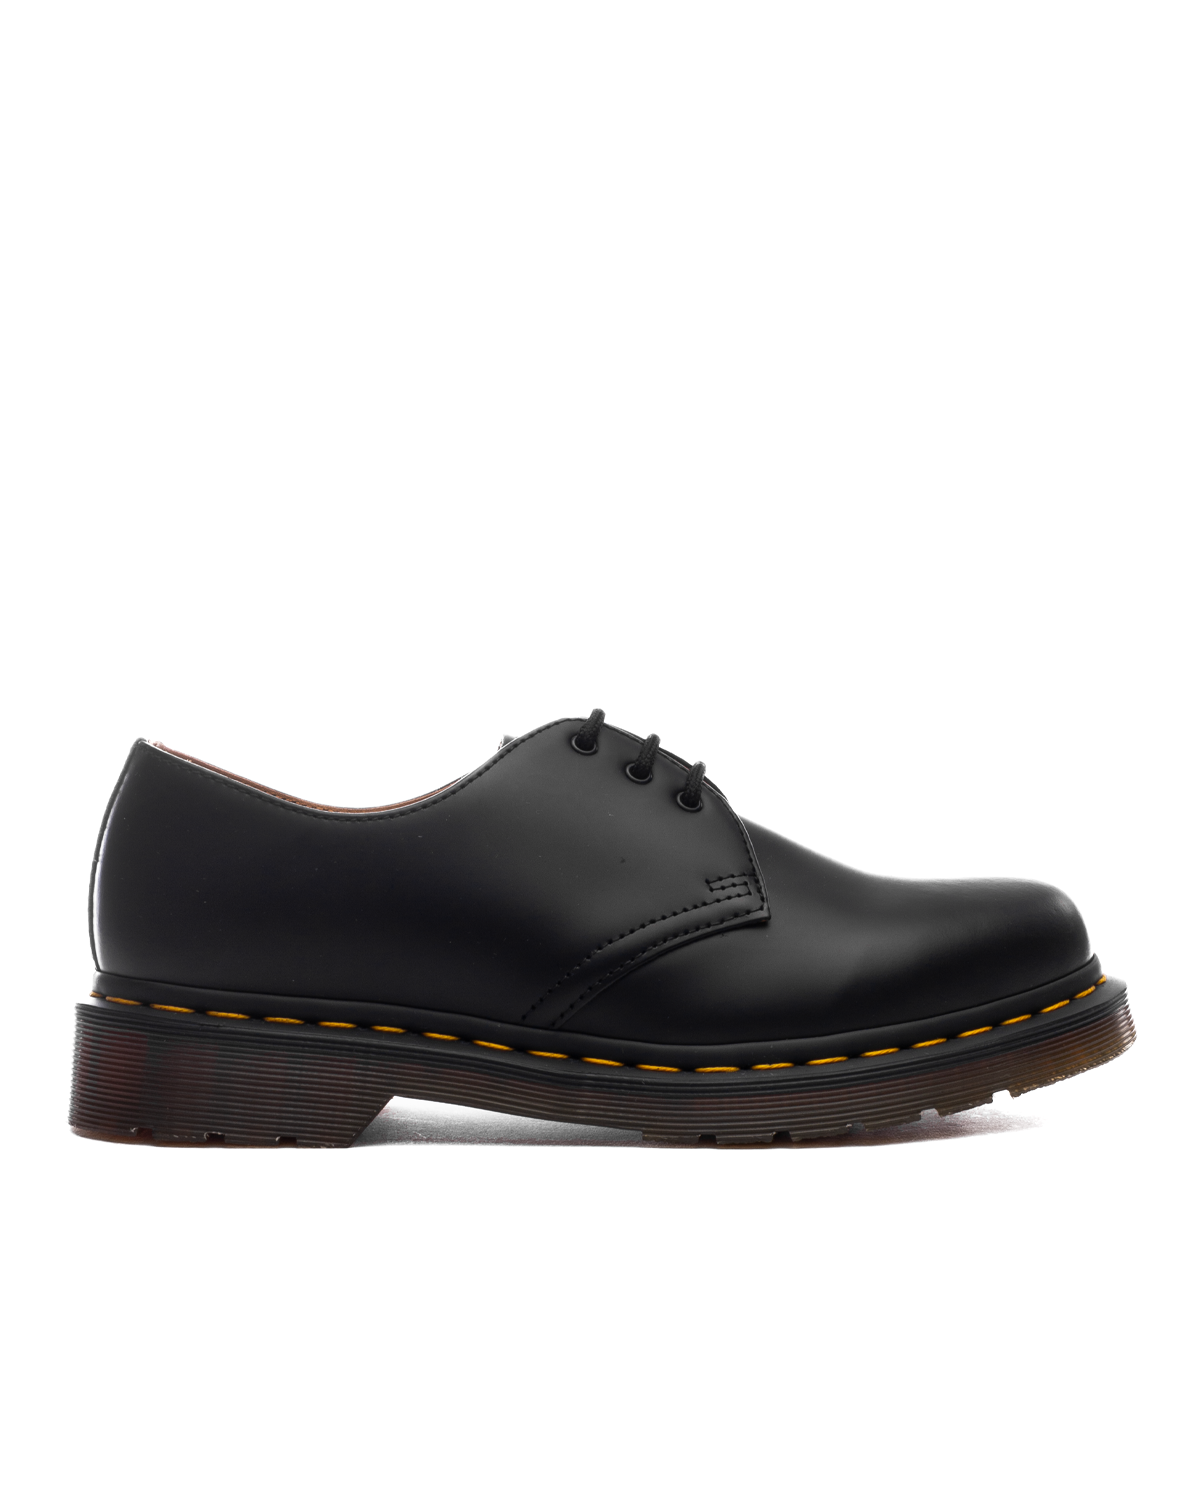 1461 Black Smooth Leather Oxford